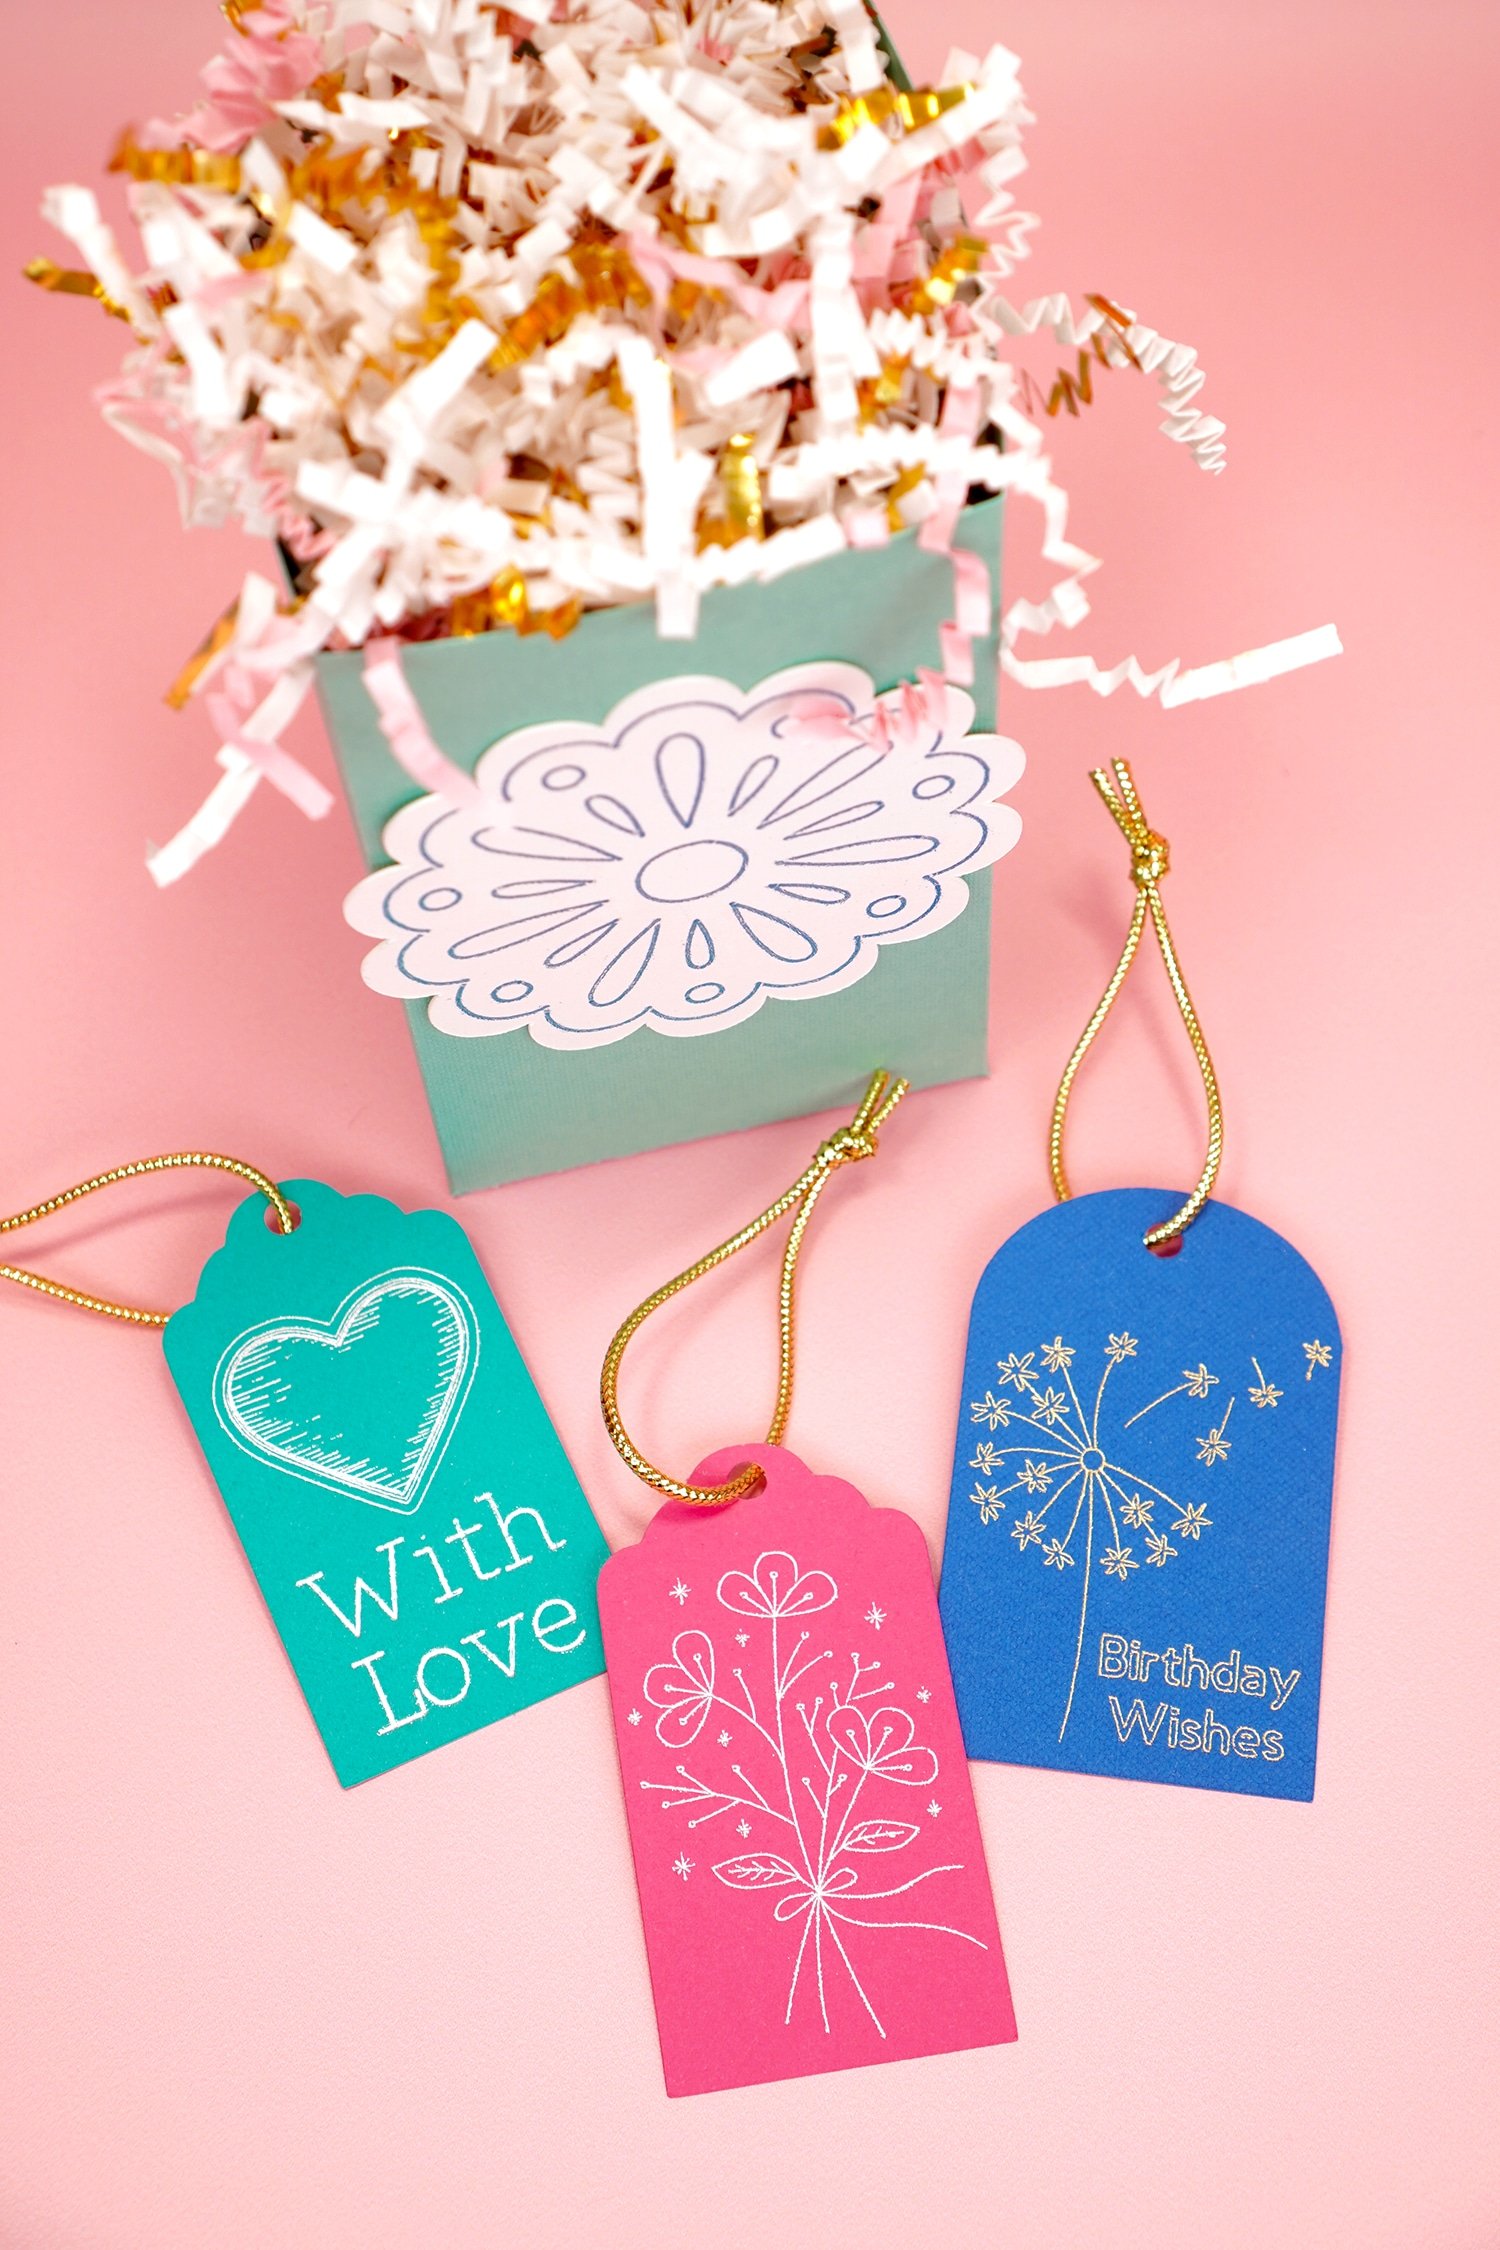 Colorful foil embellished gift tags and gift bag on coral background